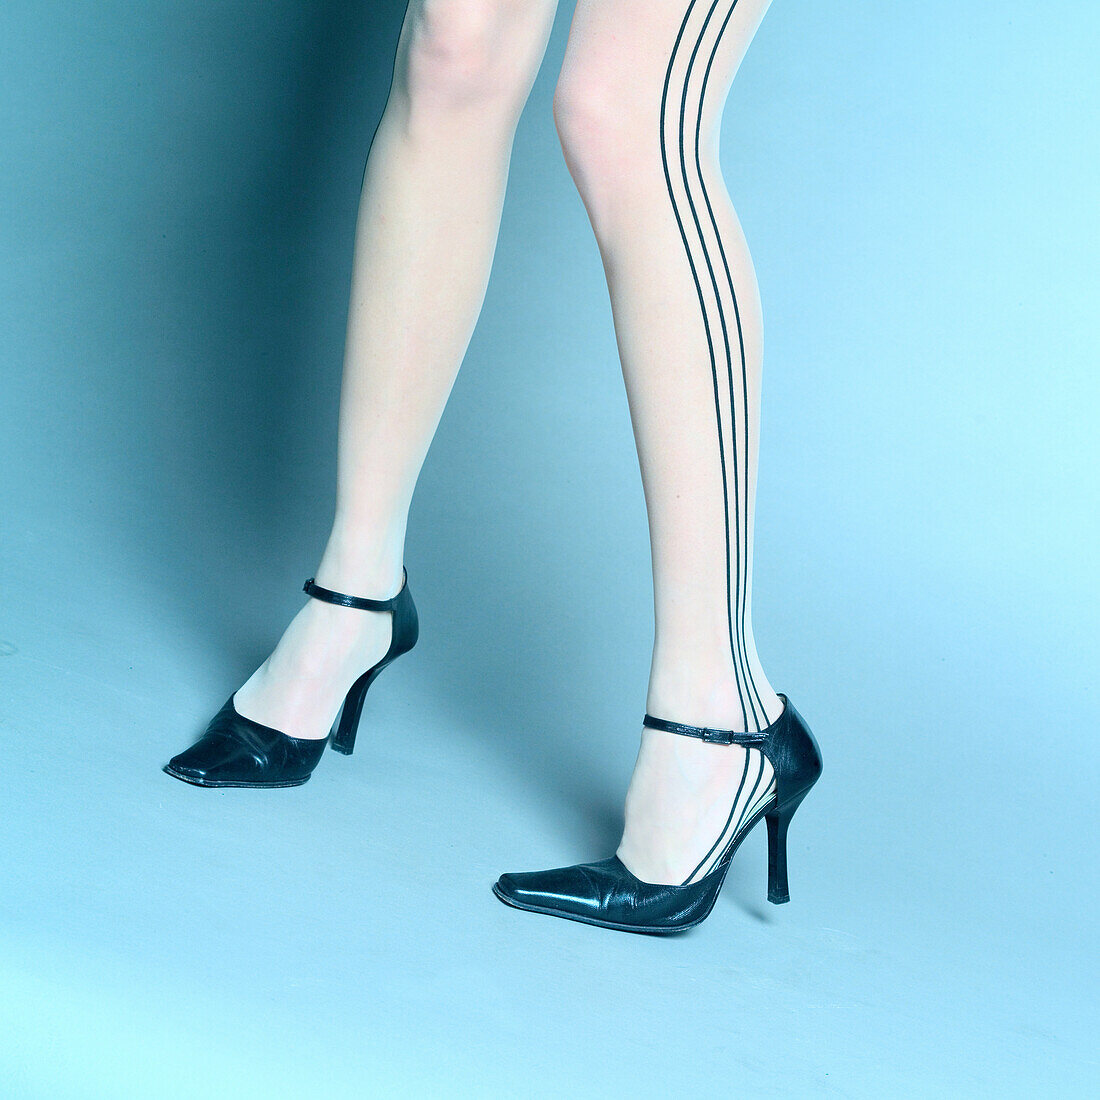 Young woman in stockings with stripes wearing high heel pump